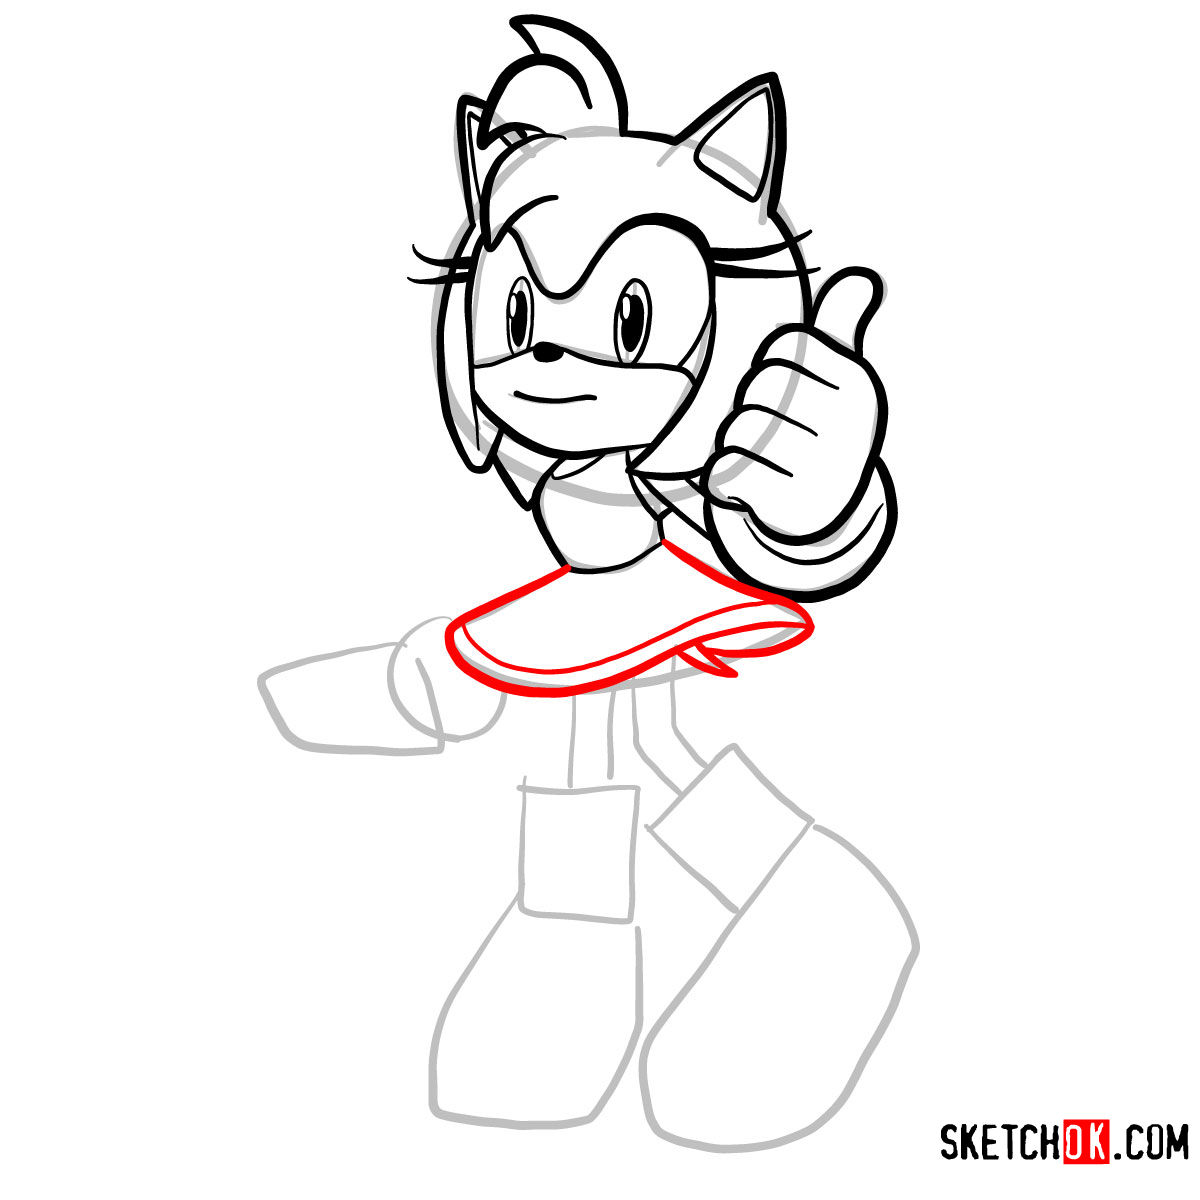 Amy rose how to draw